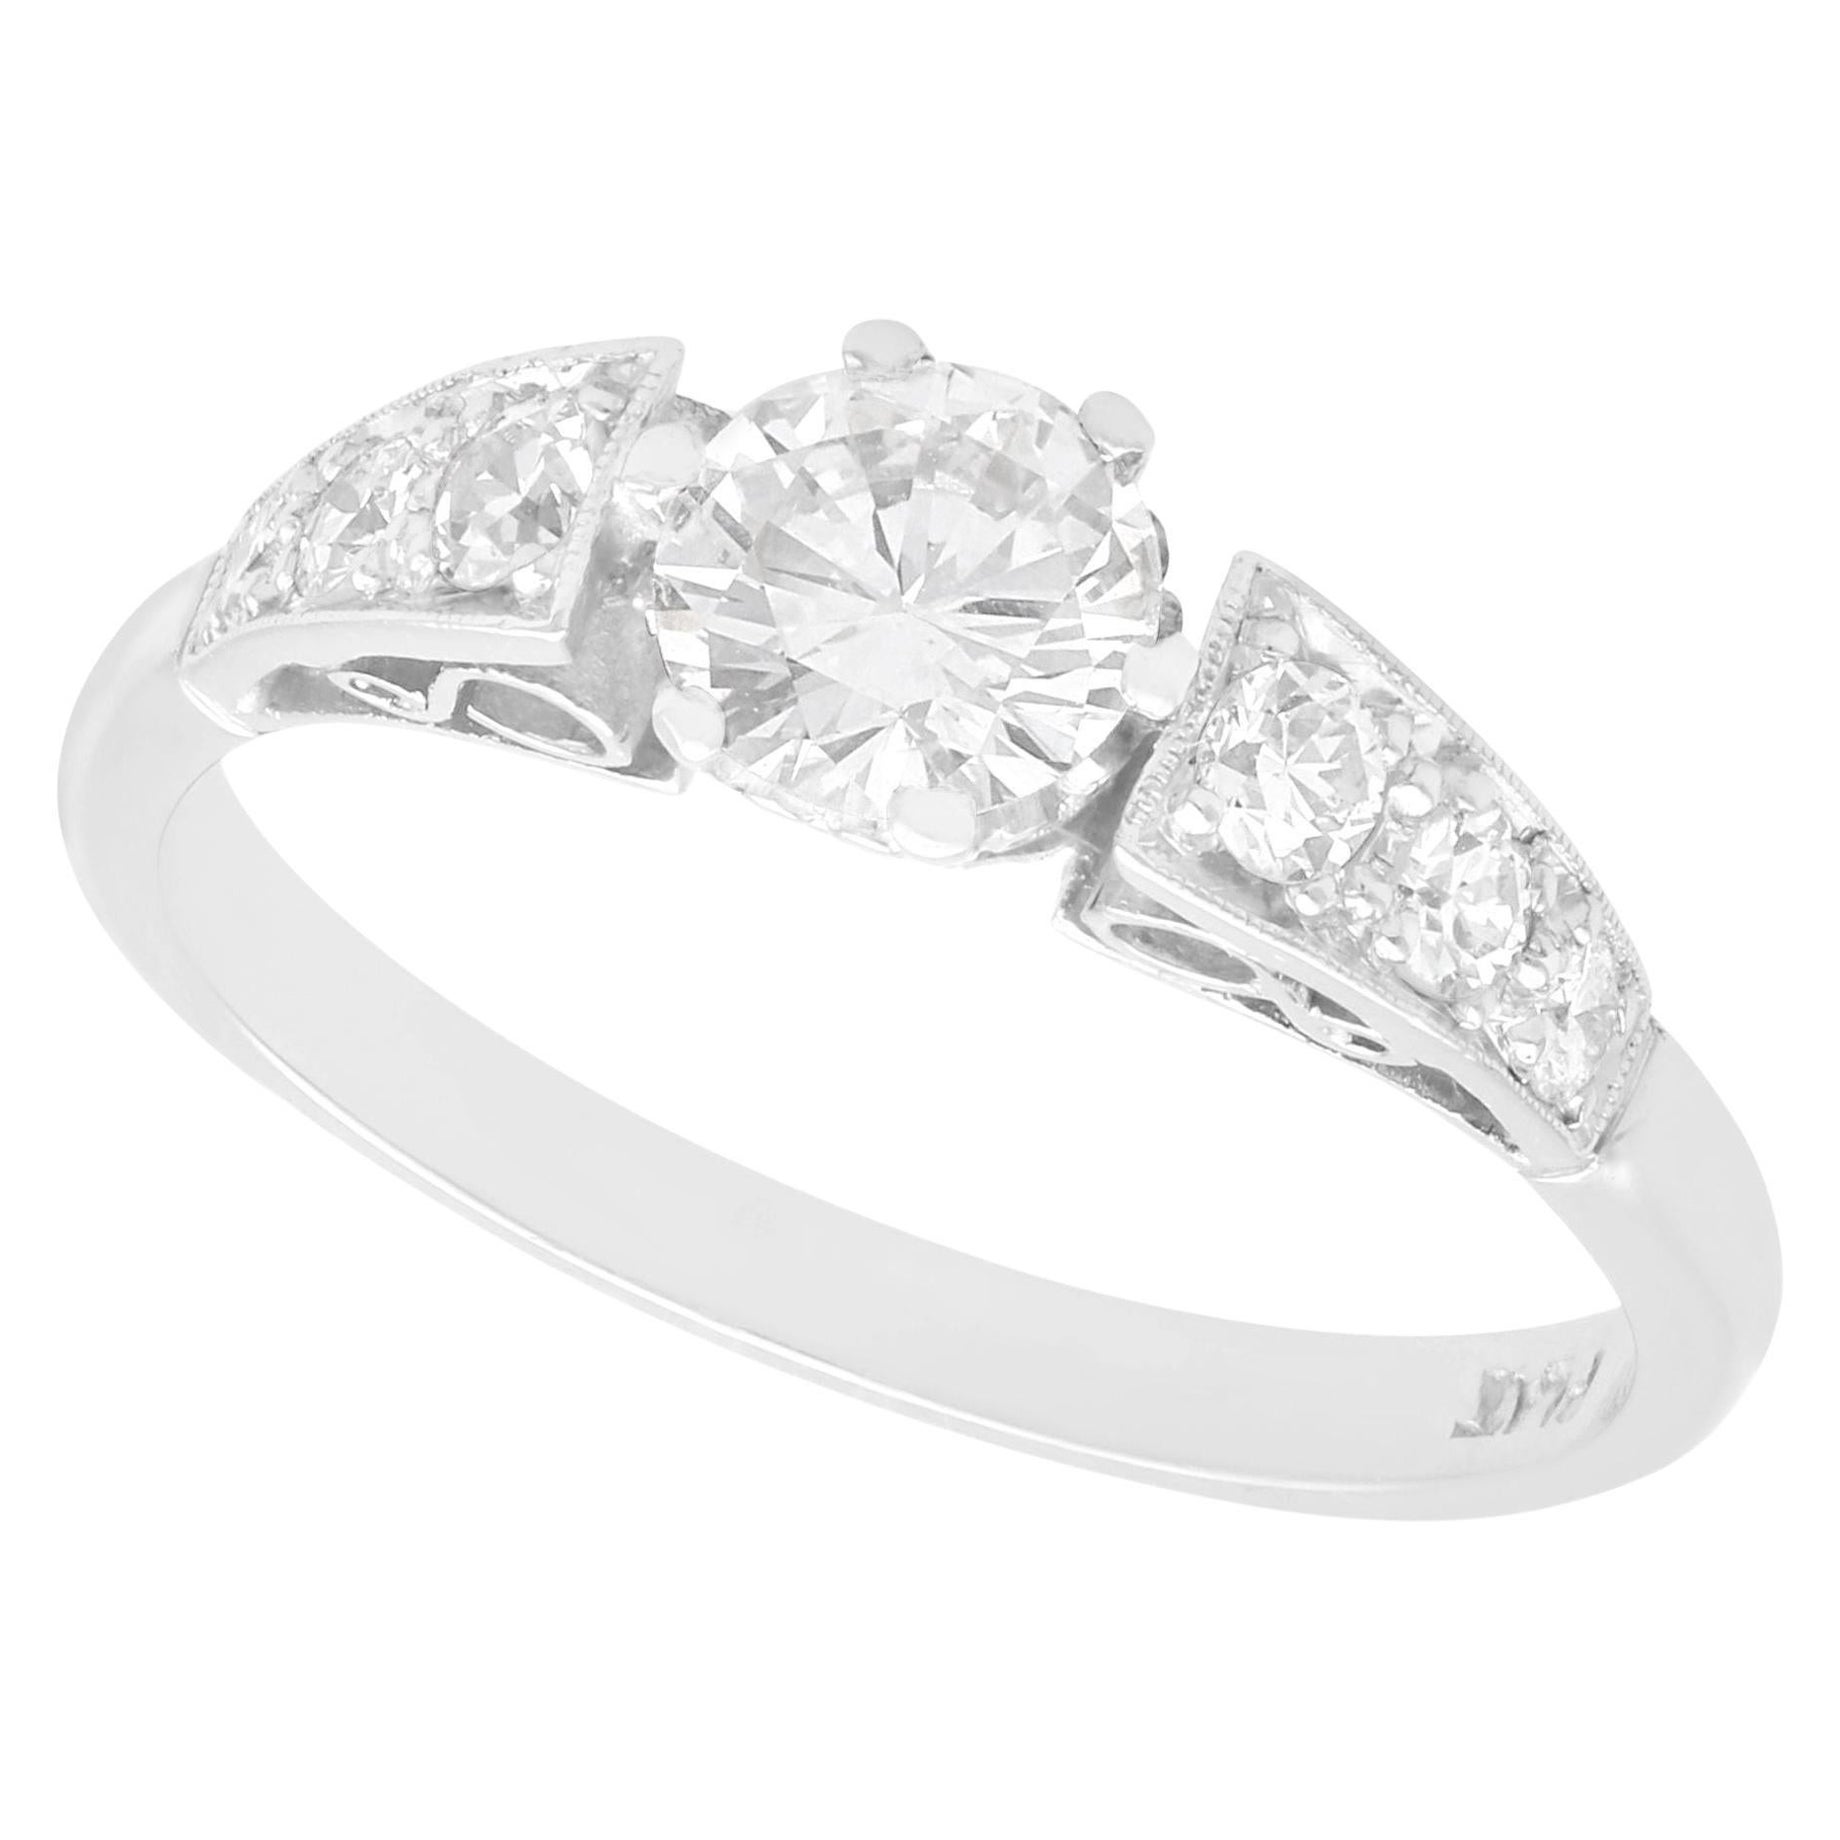 Vintage 1.07 Carat Diamond and Platinum Solitaire Ring For Sale